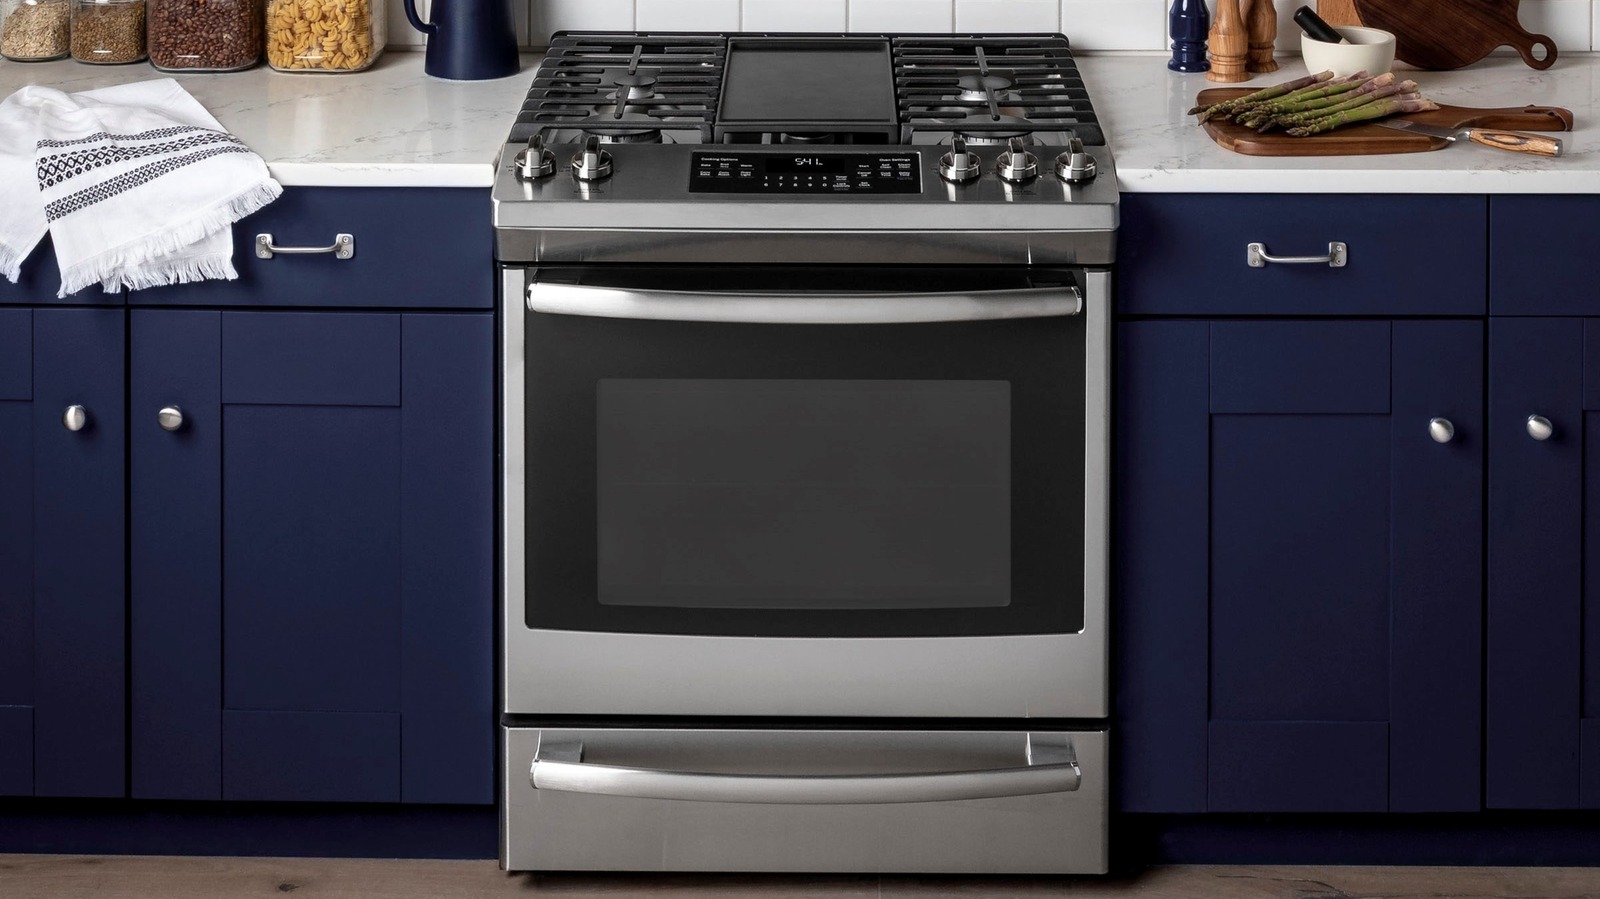 What is the bottom drawer under your oven?